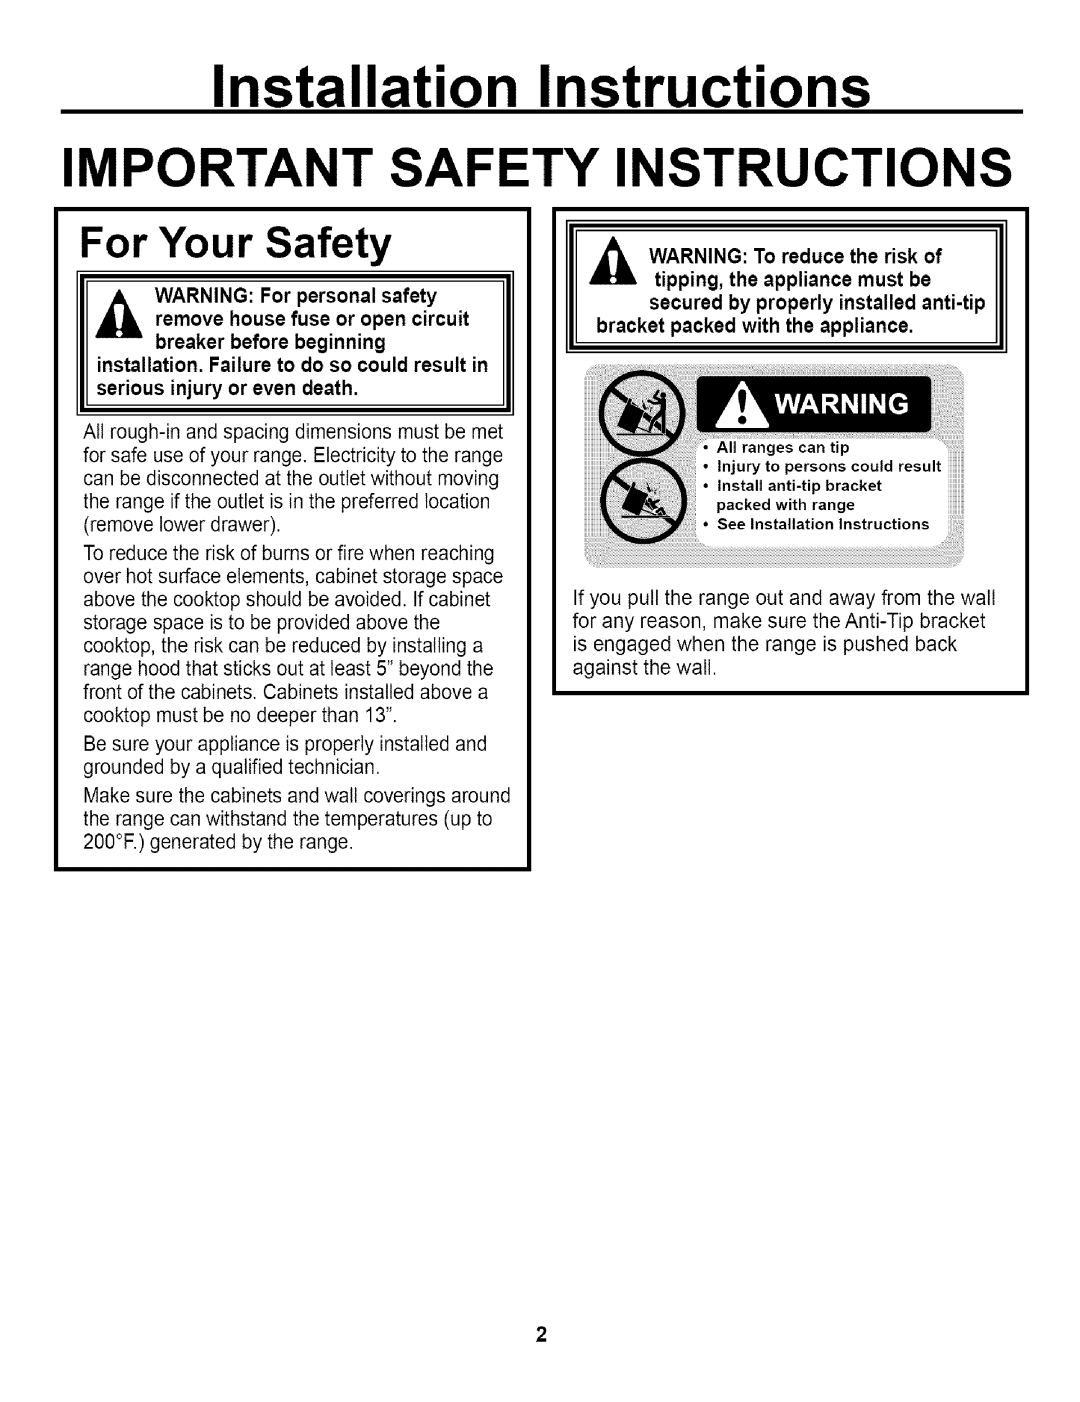 GE JBP79 Installation Instructions, Important Safety Instructions, For Your Safety, serious injury or even death 